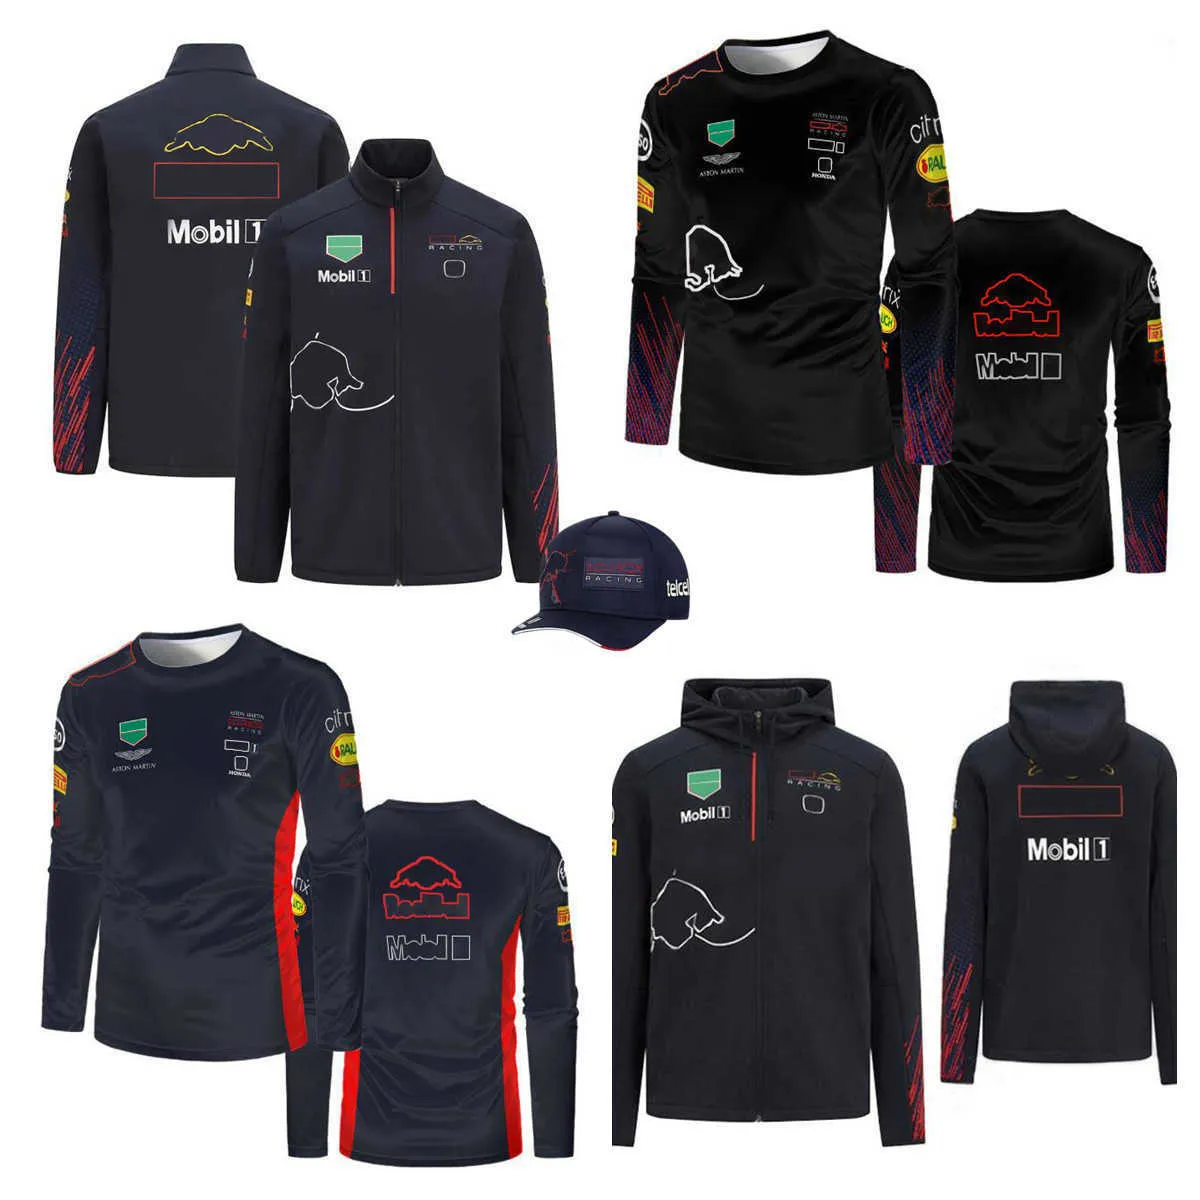 Cycle Clothes F1 Formula One Racing Hoodie Spring and Autumn Team Sweatshirt Same give away hat num 1 11 logo